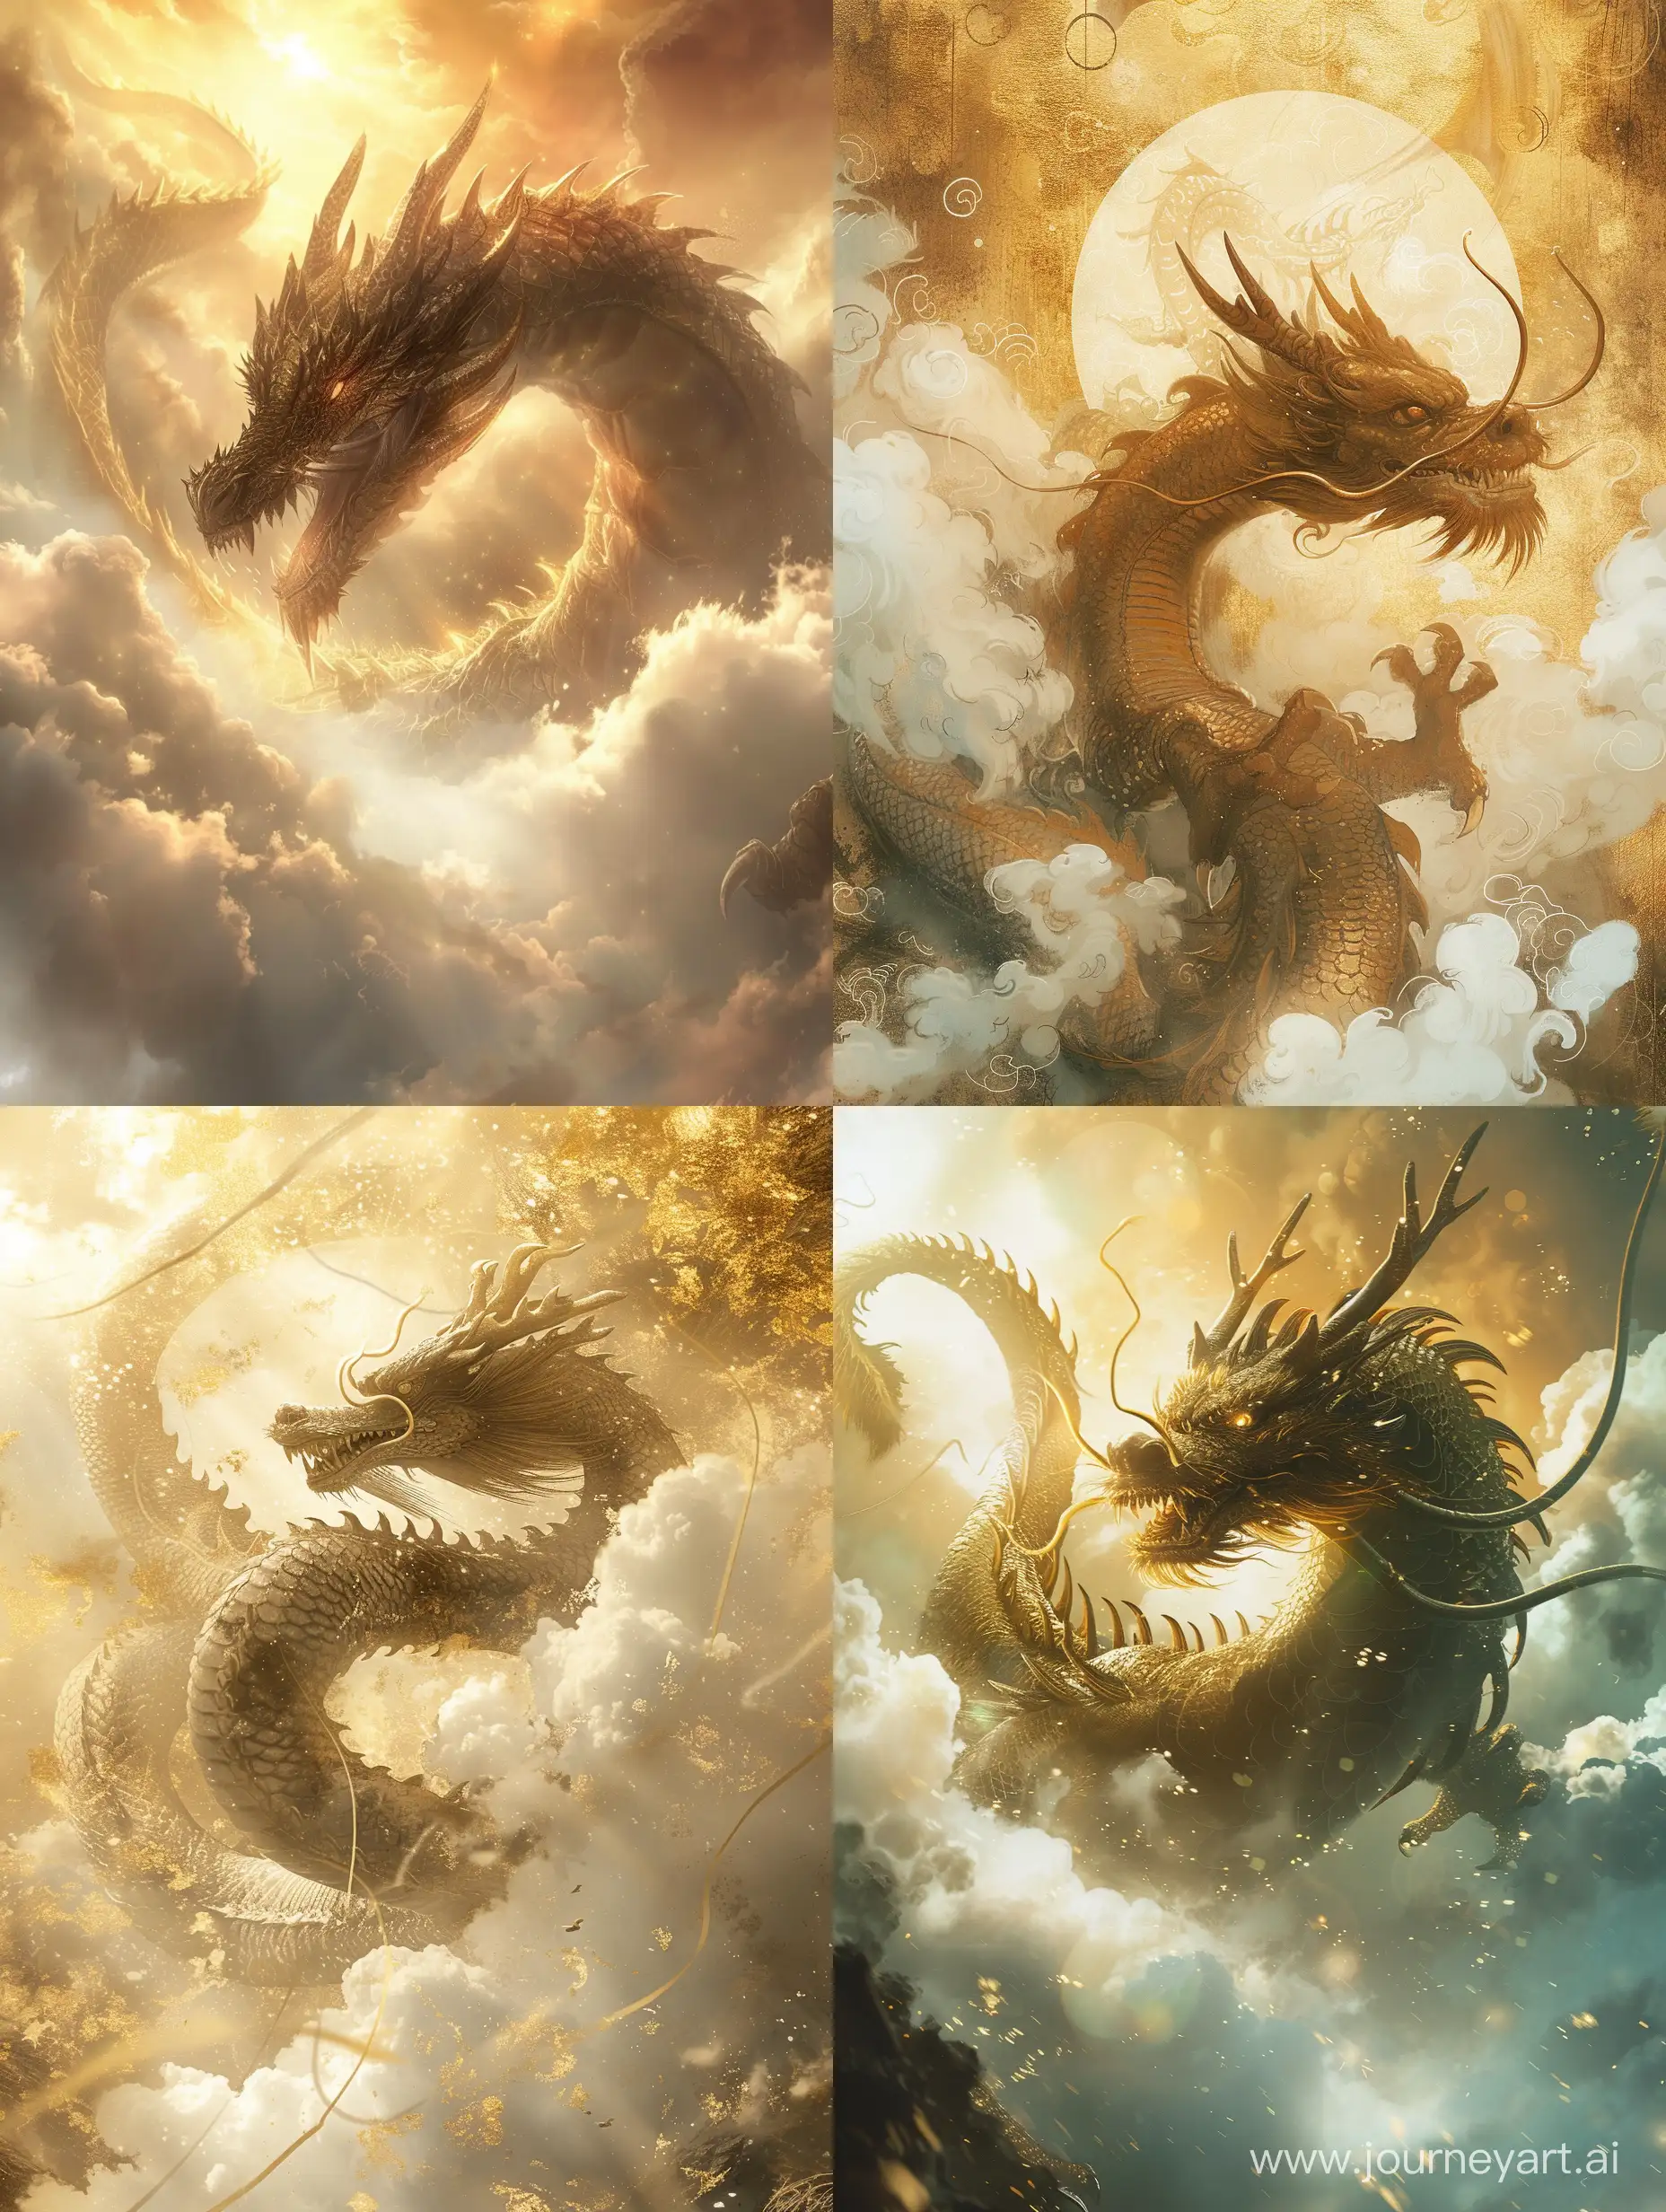 Majestic-Chinese-Dragon-Emerges-from-Cyberpunk-Clouds